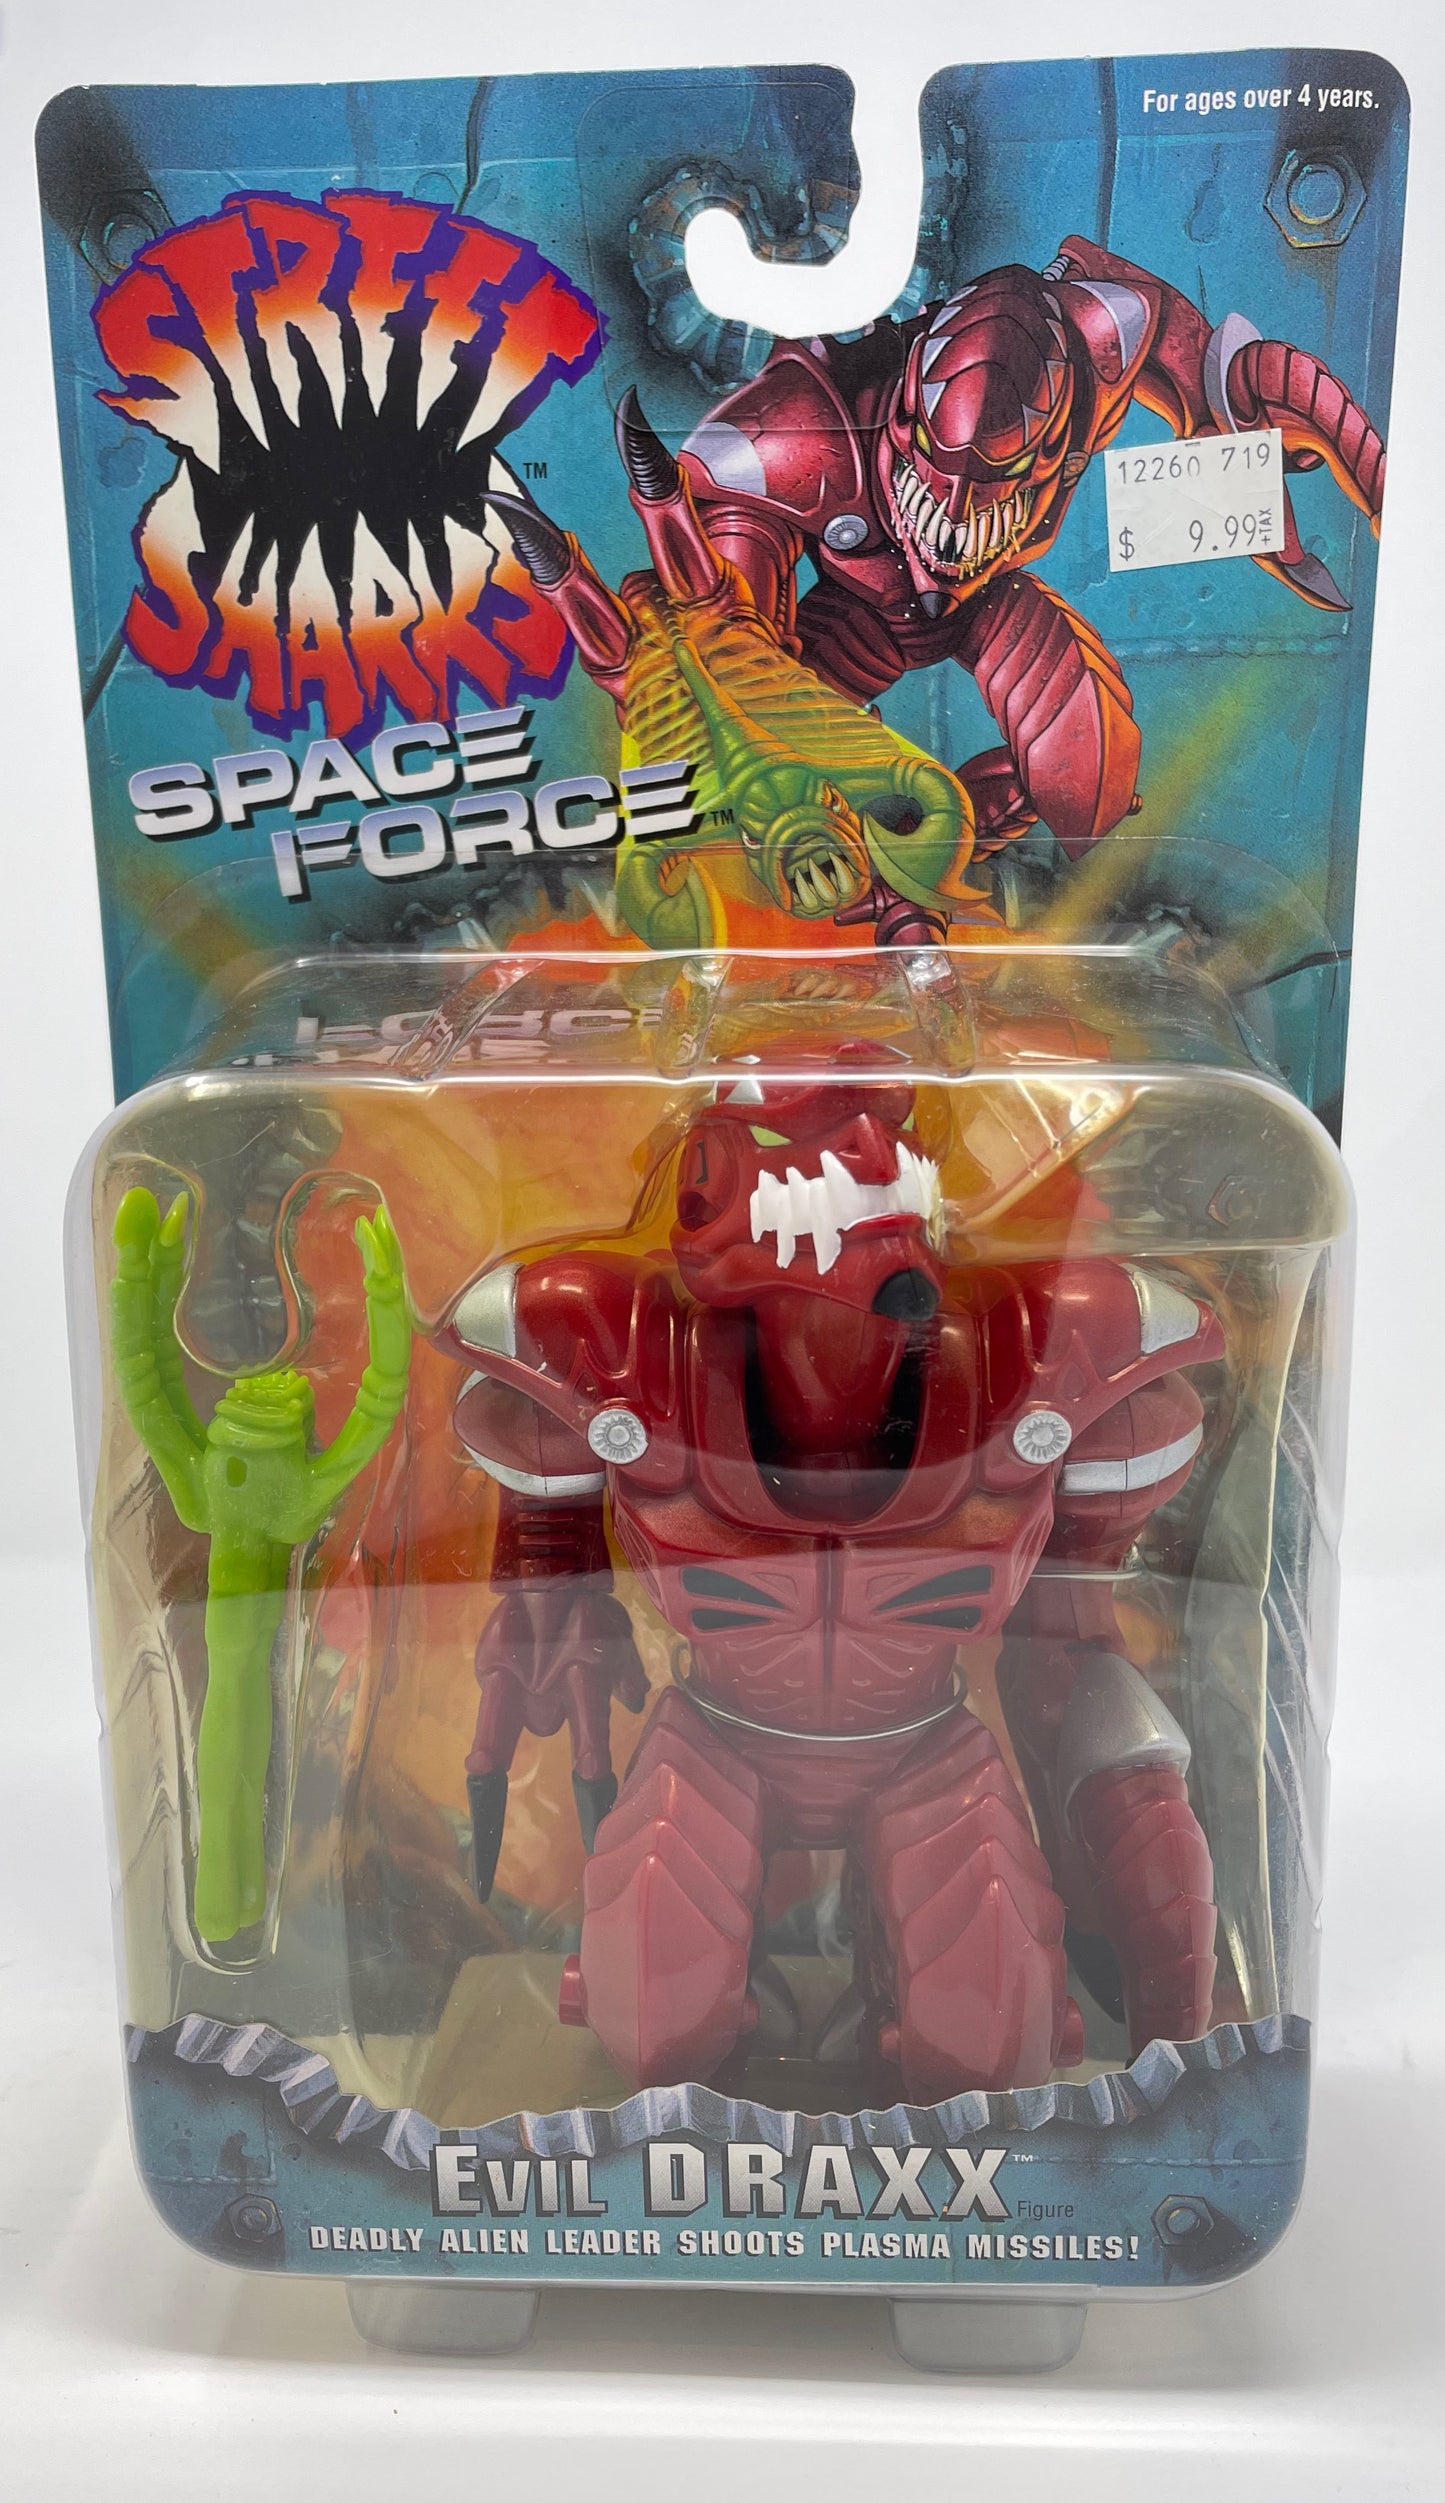 Evil Draxx - Street Sharks Space Force (6 of 10)